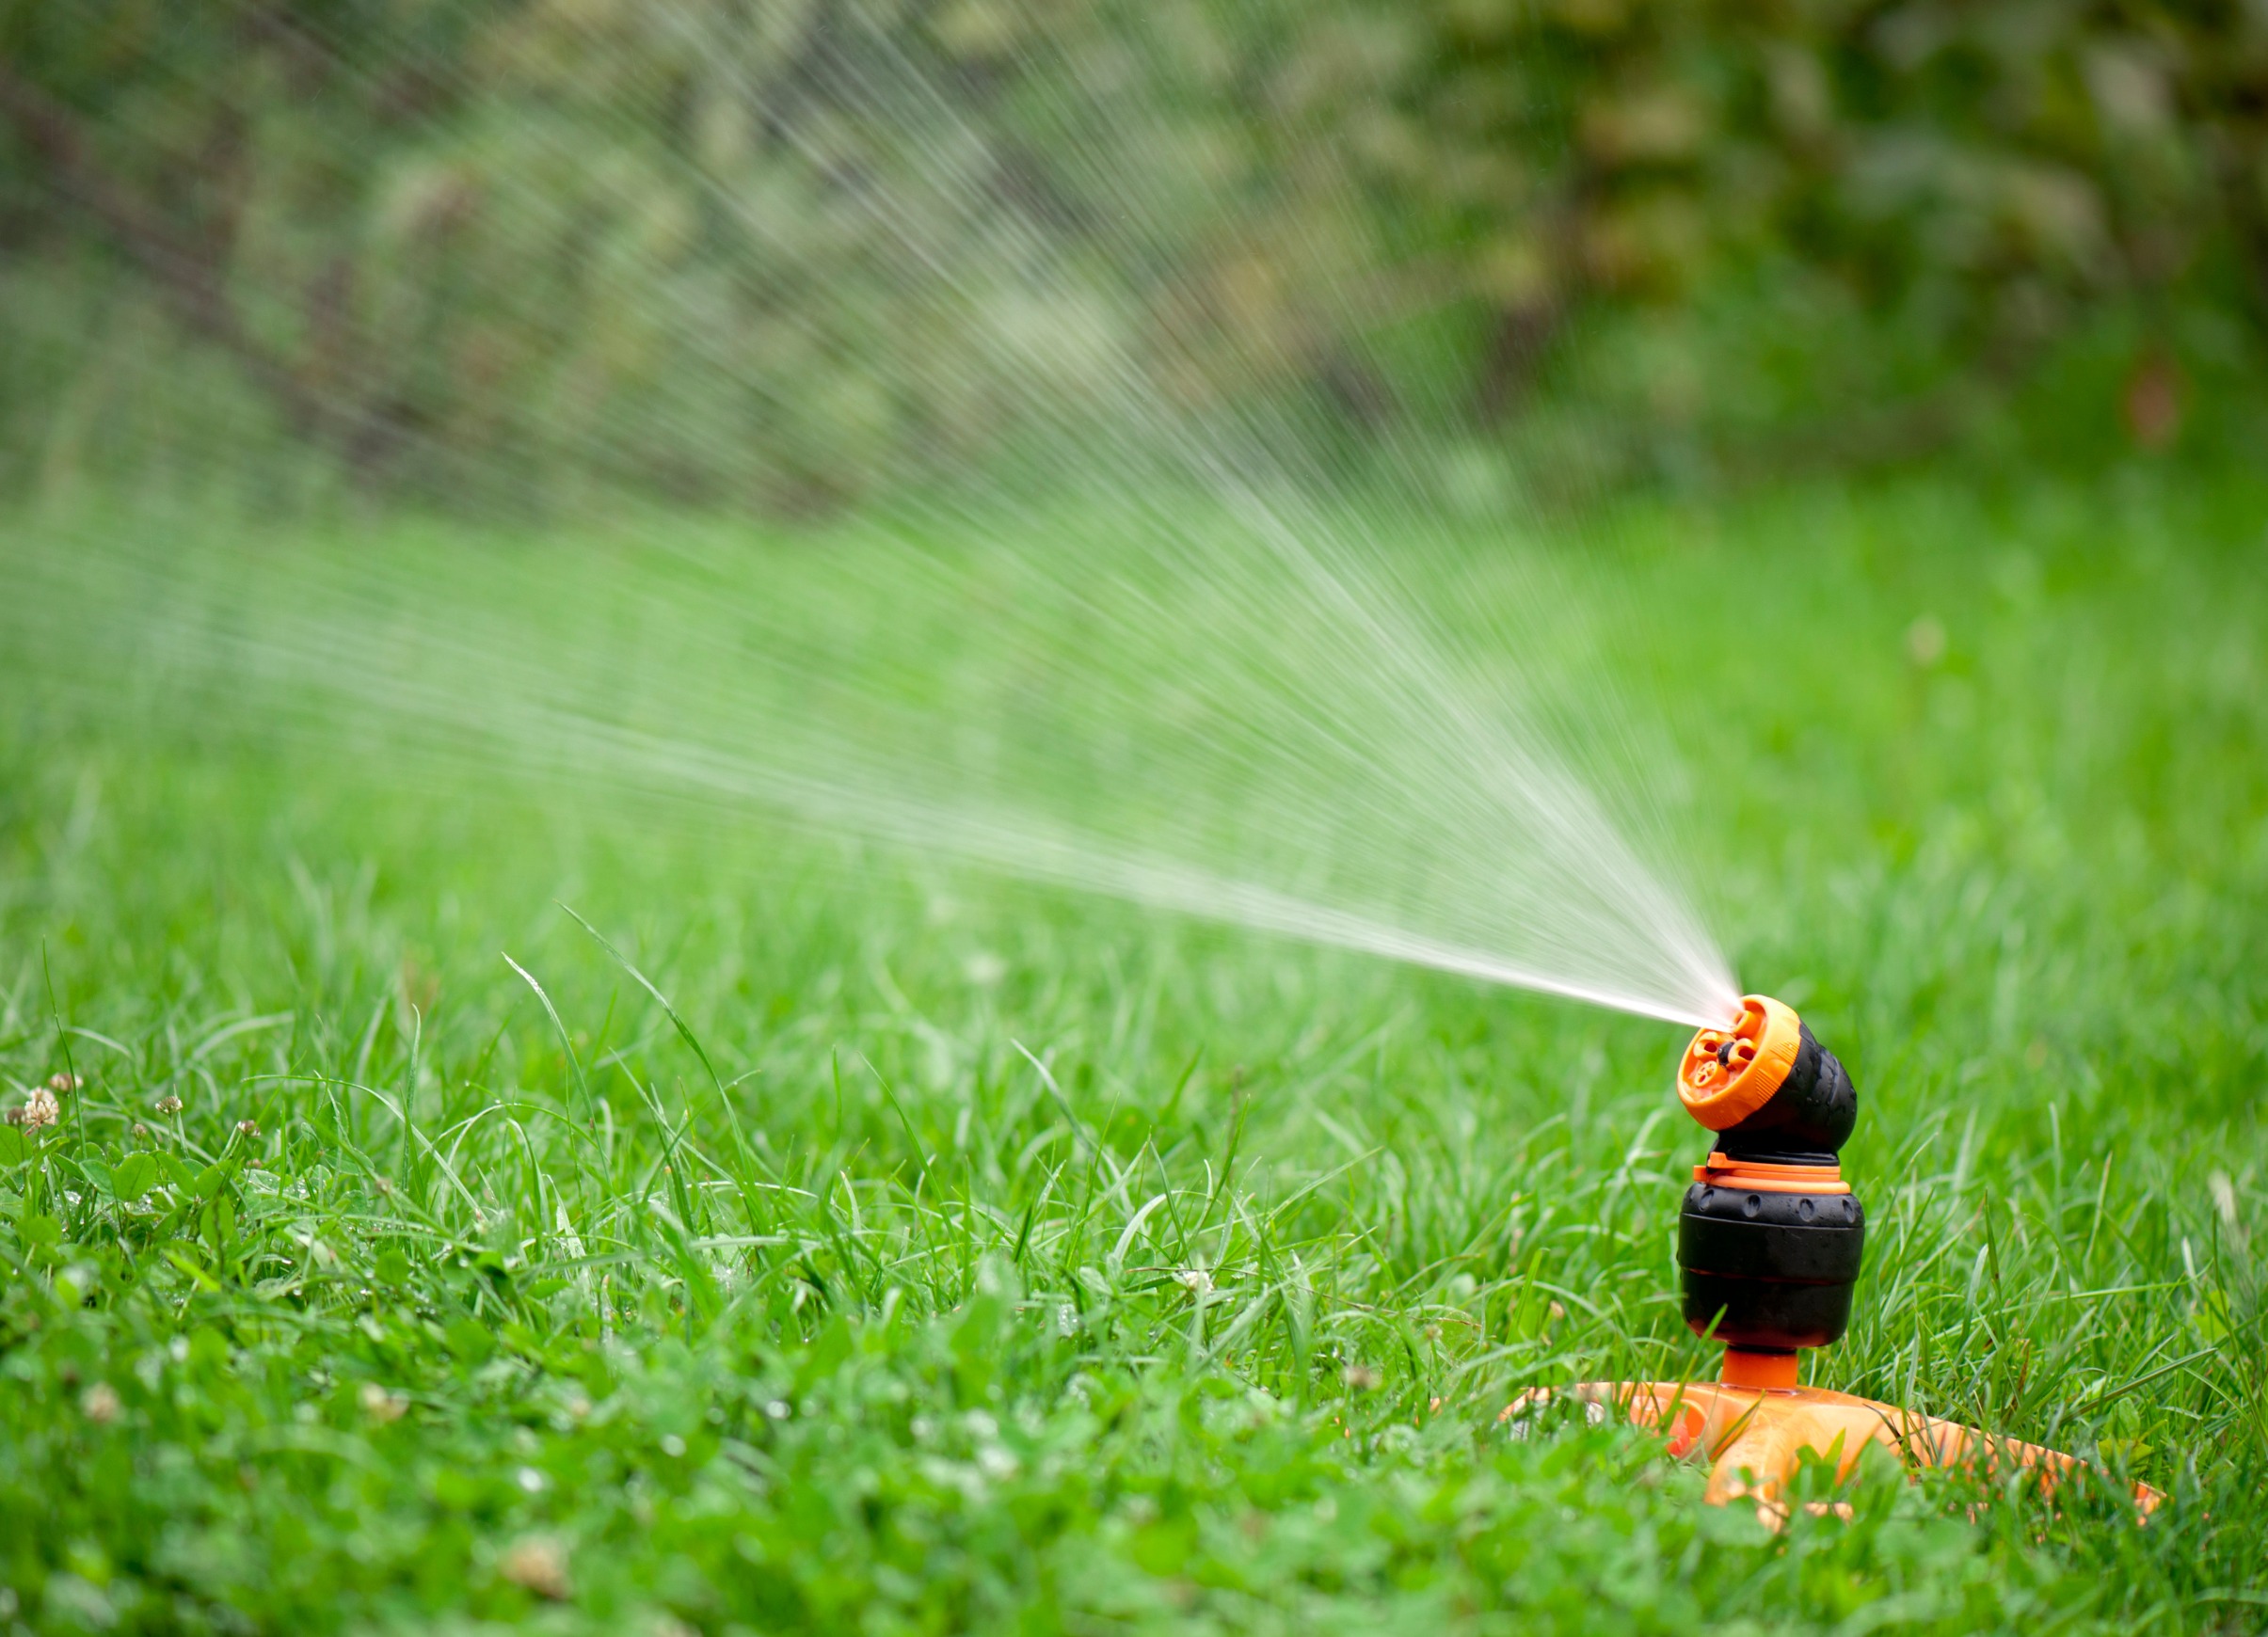 How often to water lawn